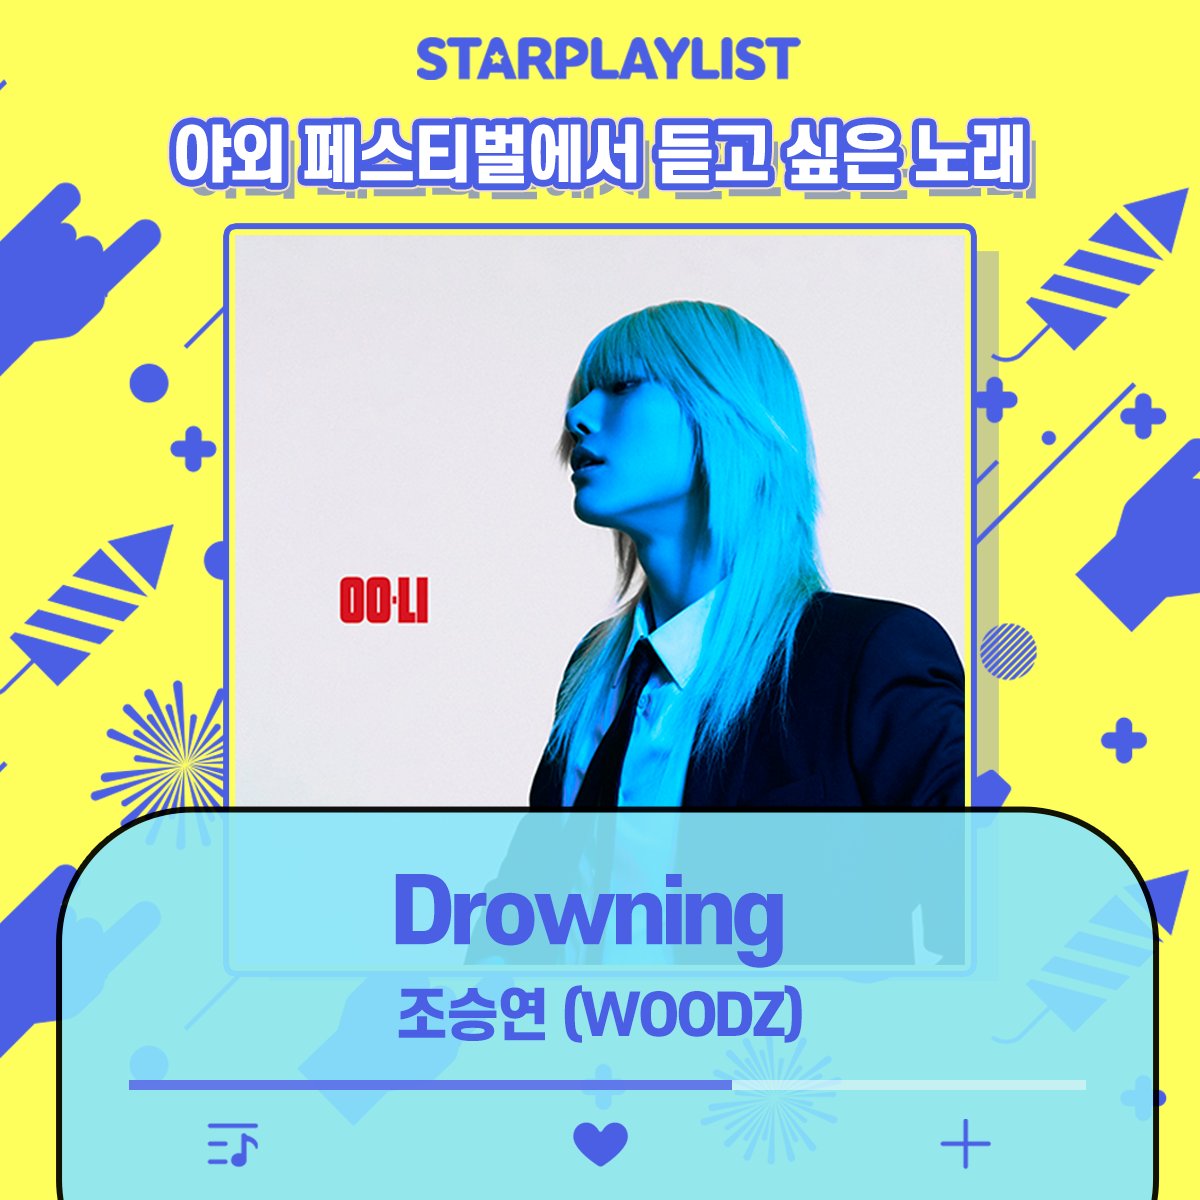 <#Starplay #StarPlayListVote> 🌳The song you want to hear at a music festival🌳 🥇Drowning - #WOODZ 04:09 ━●──── 05:07 ⇆ 　　◁　 ❚❚　 ▷　　↻ #KPOPSong #IdolSong #festival #StarPlayList